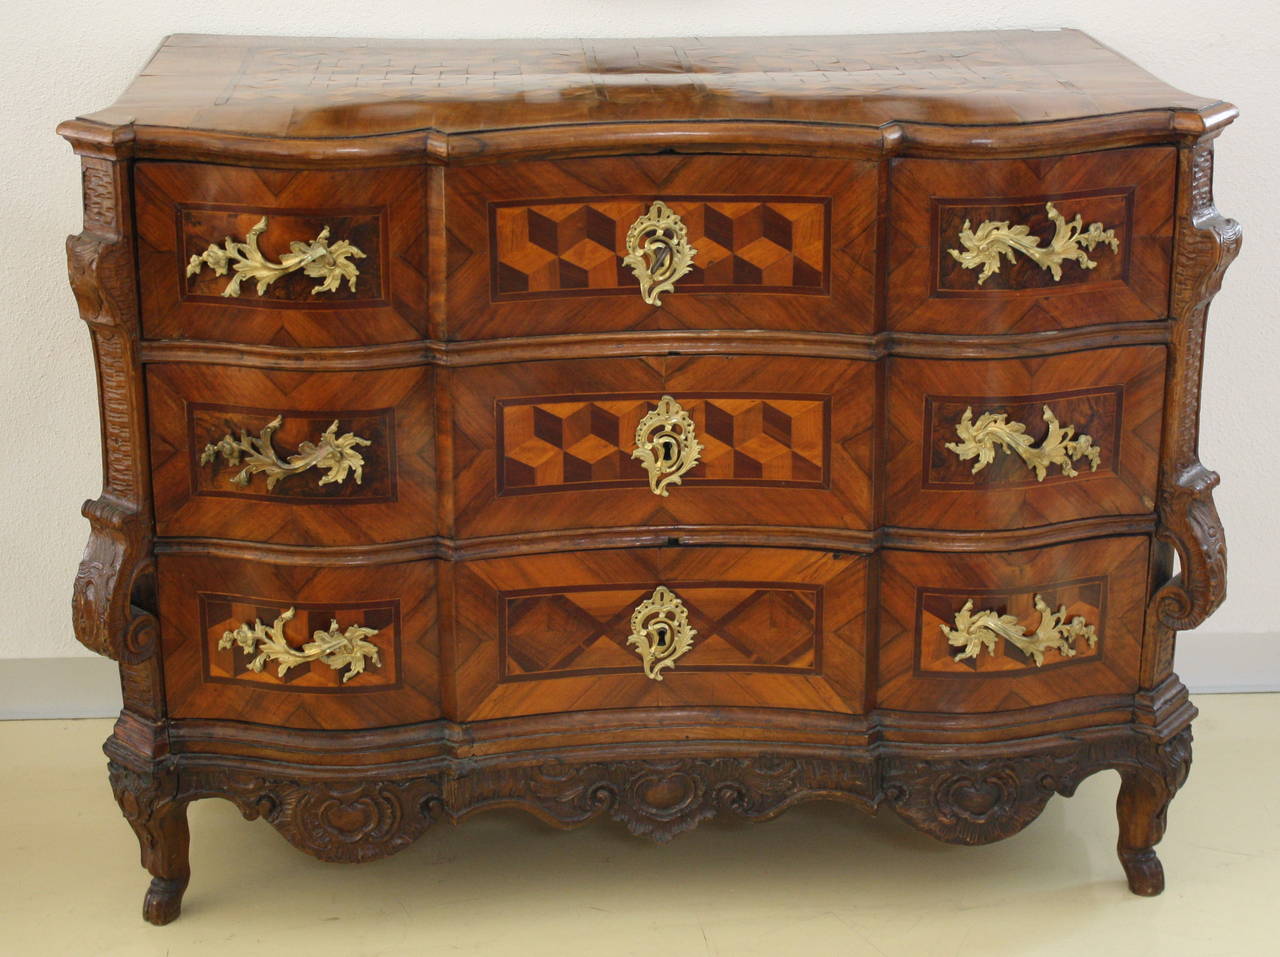 A Baroque three-drawer chest with cube marquetry in field, sides carved and bronze fittings. Original patina.